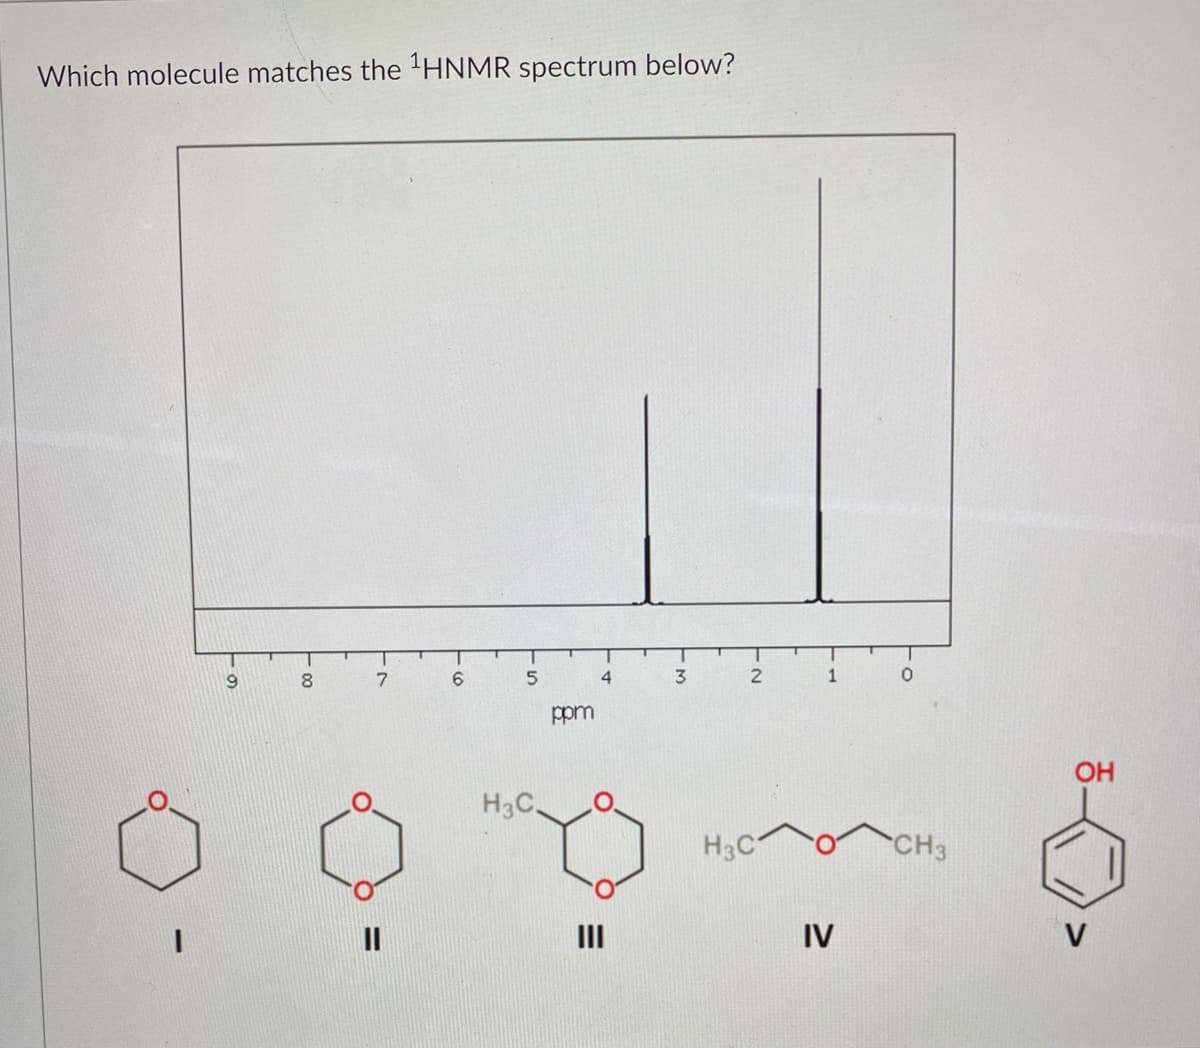 Which molecule matches the 'HNMR spectrum below?
9
8.
4.
3
2
1
ppm
OH
H3C.
H3C
CH3
II
II
IV
V
-00
